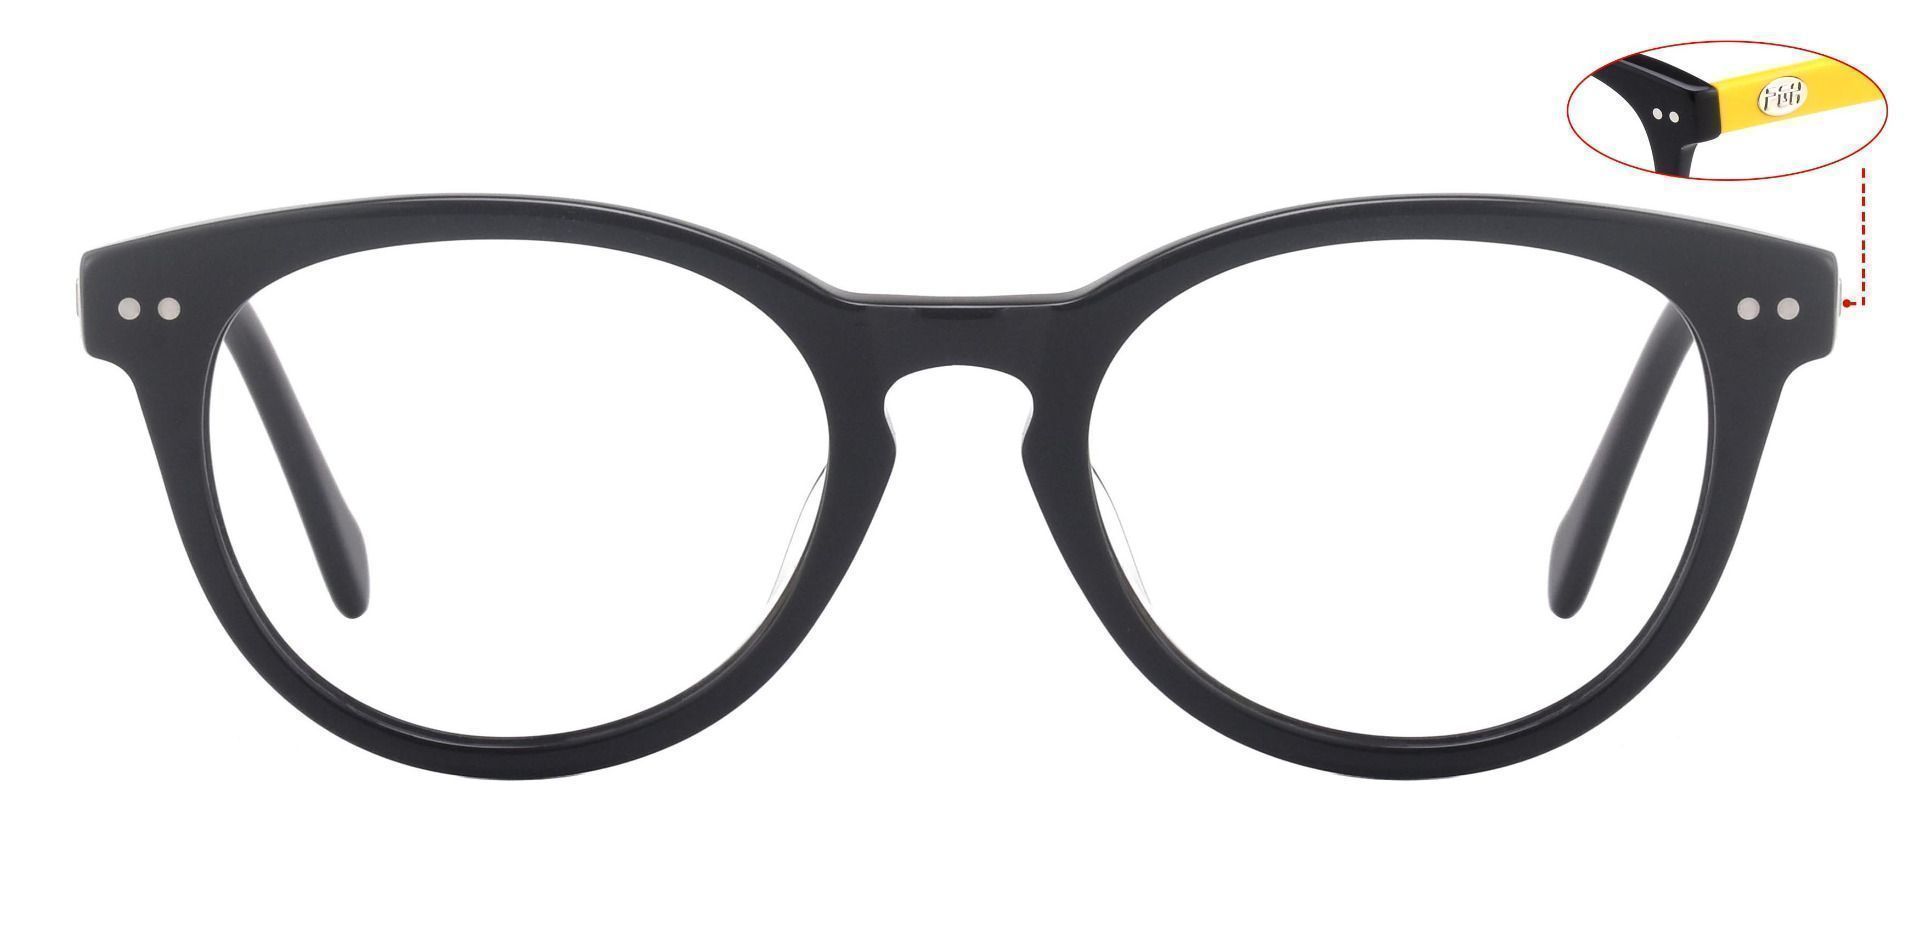 Forbes Oval Prescription Glasses - The Frame Is Black And Gold